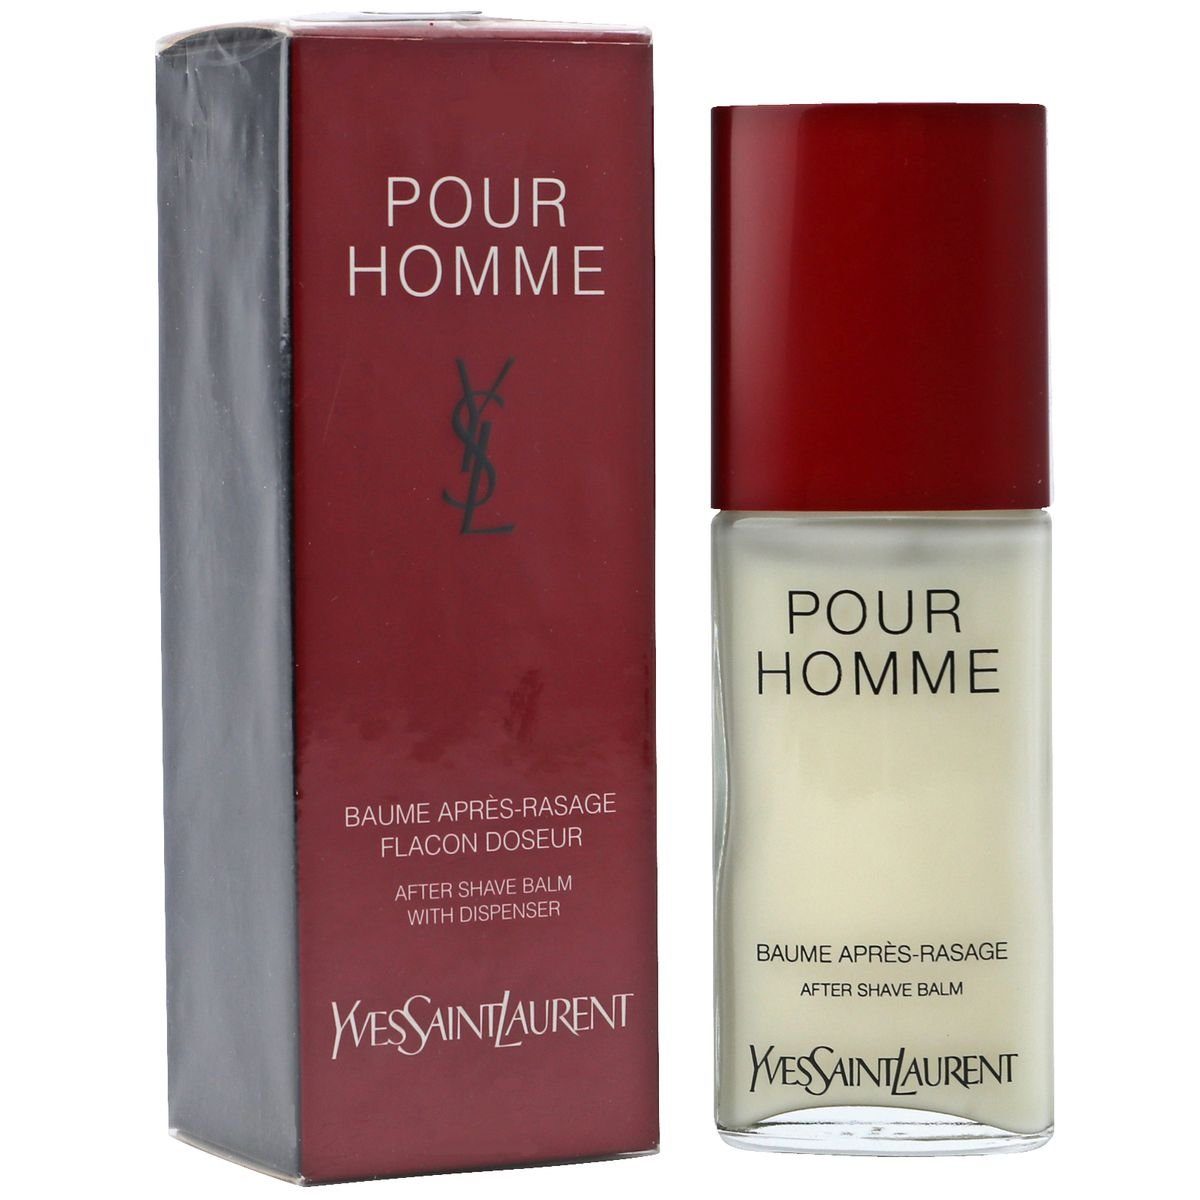 YVES SAINT LAURENT After-Shave Balsam Yves Saint Laurent Pour Homme After Shave Balm 75 ml YSL